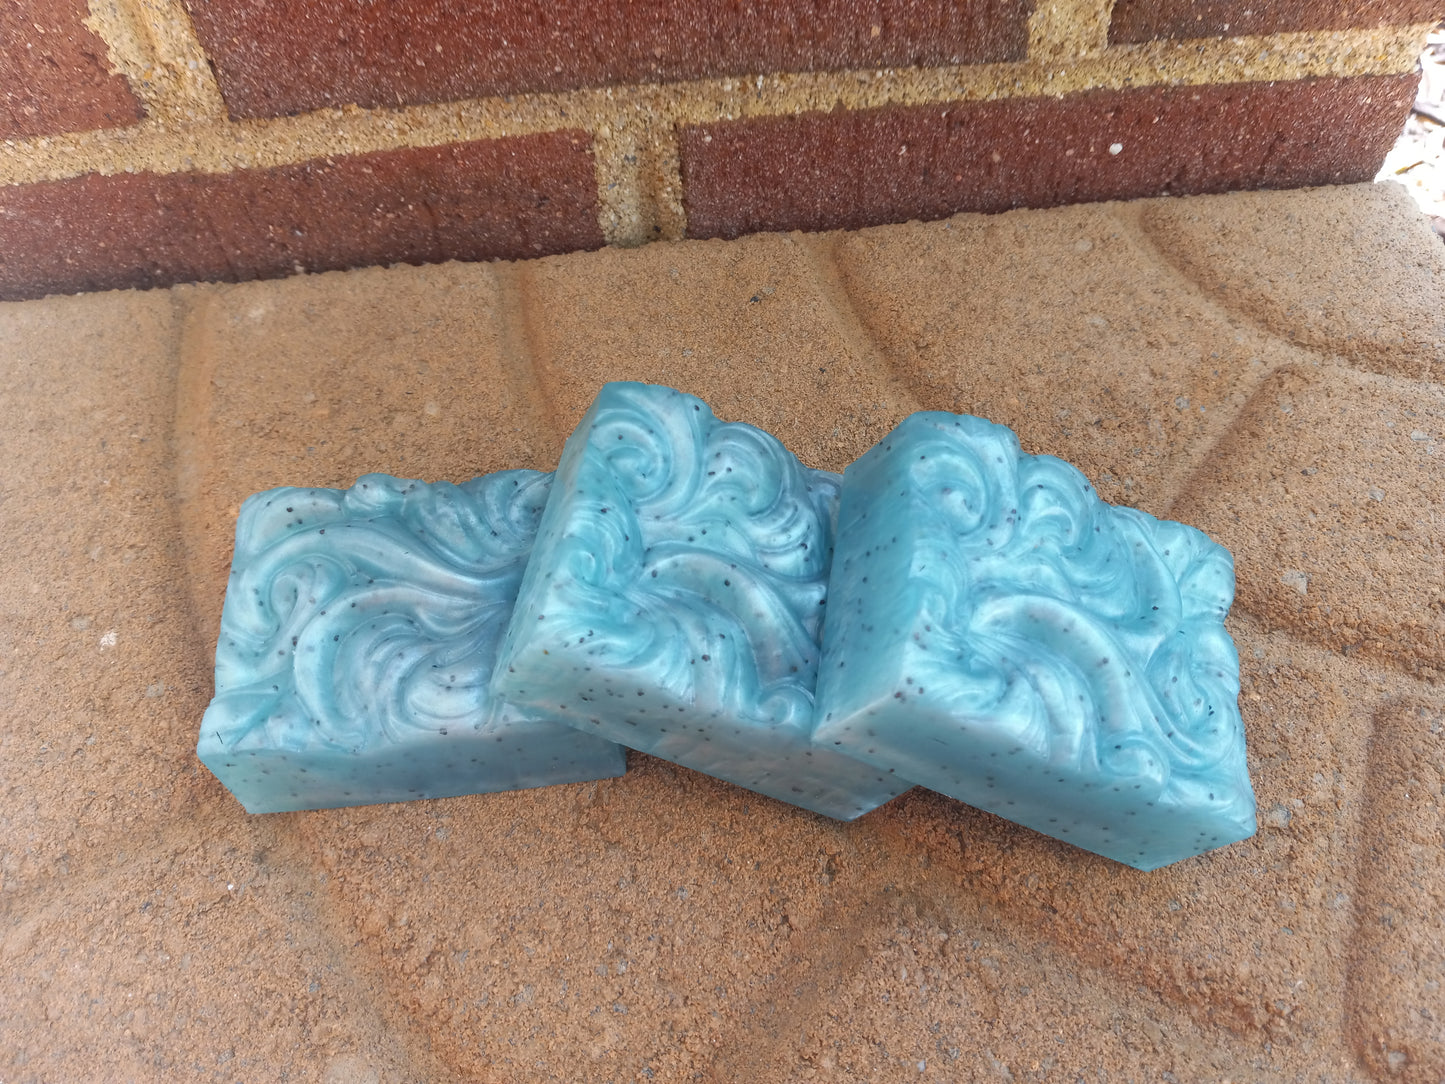 After the Rain - Hand Poured Exfoliating Olive Oil / Hemp Seed Oil Soap